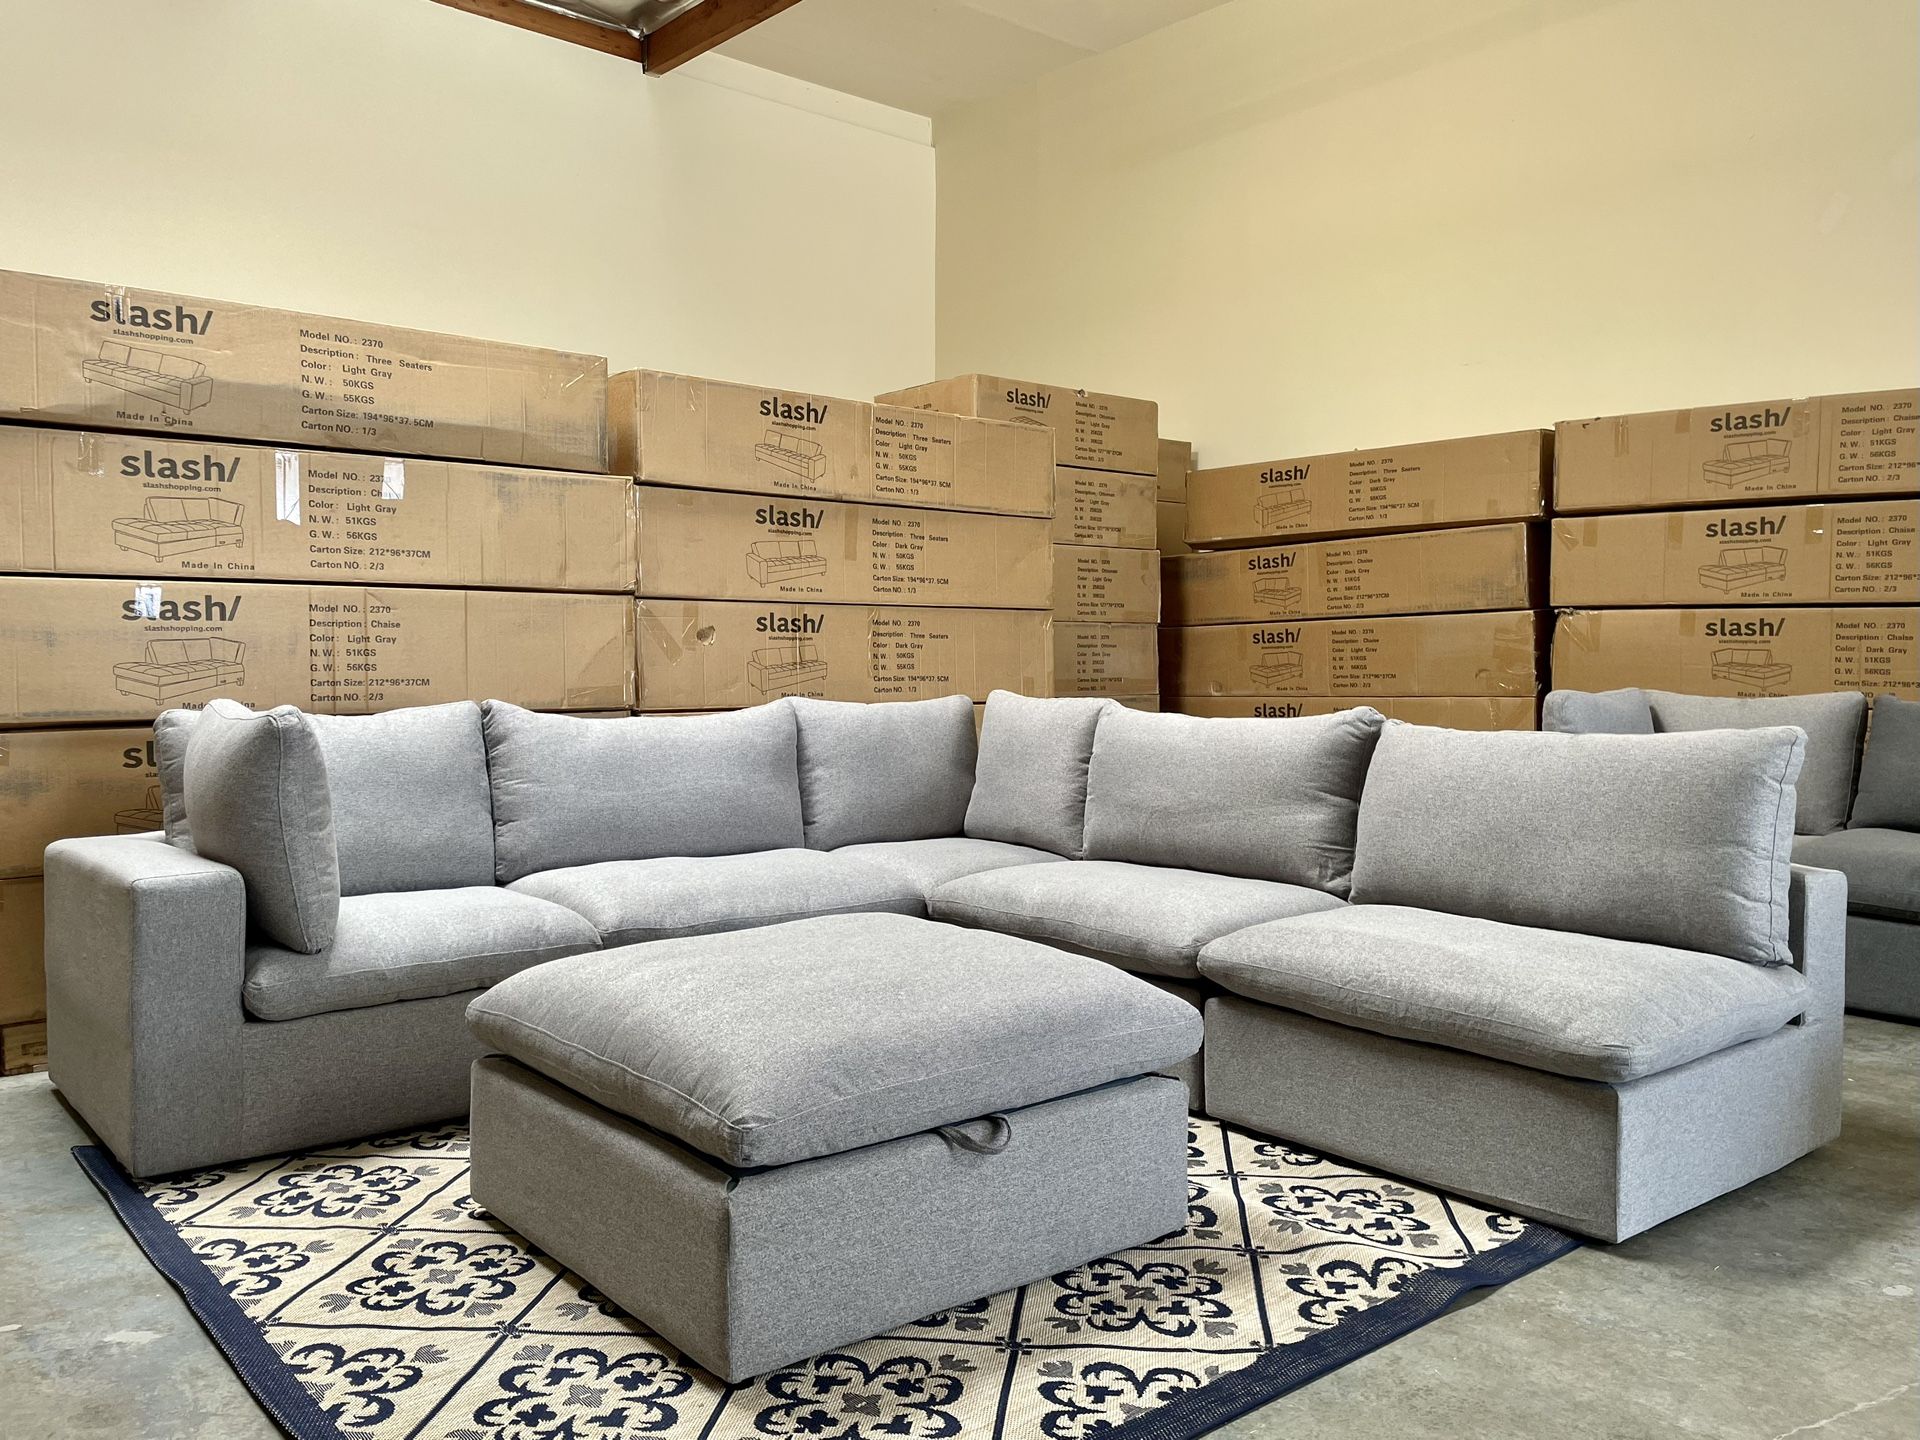 🏷Cloud 6pc Modular Sectional Sofa with Storage Ottoman, NEW IN BOX 📦 Washable Slipcover 💦 Water Repellent  🔥WAREHOUSE SALE ✅ Finance | Delivery